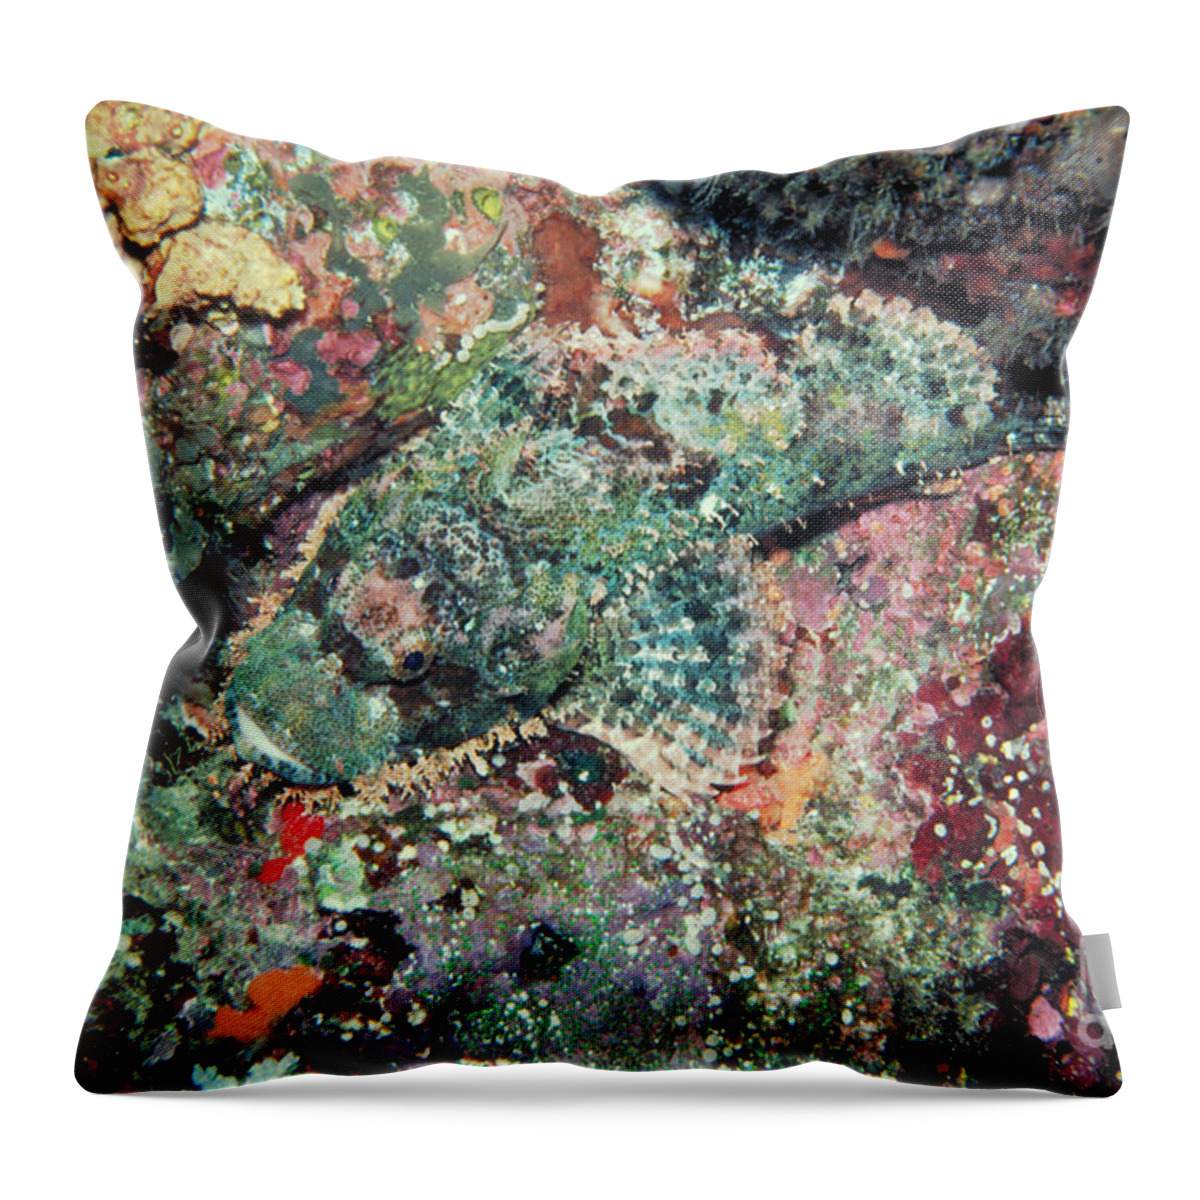 Scorpionfish Throw Pillow featuring the photograph Scorpionfish by Gregory G. Dimijian